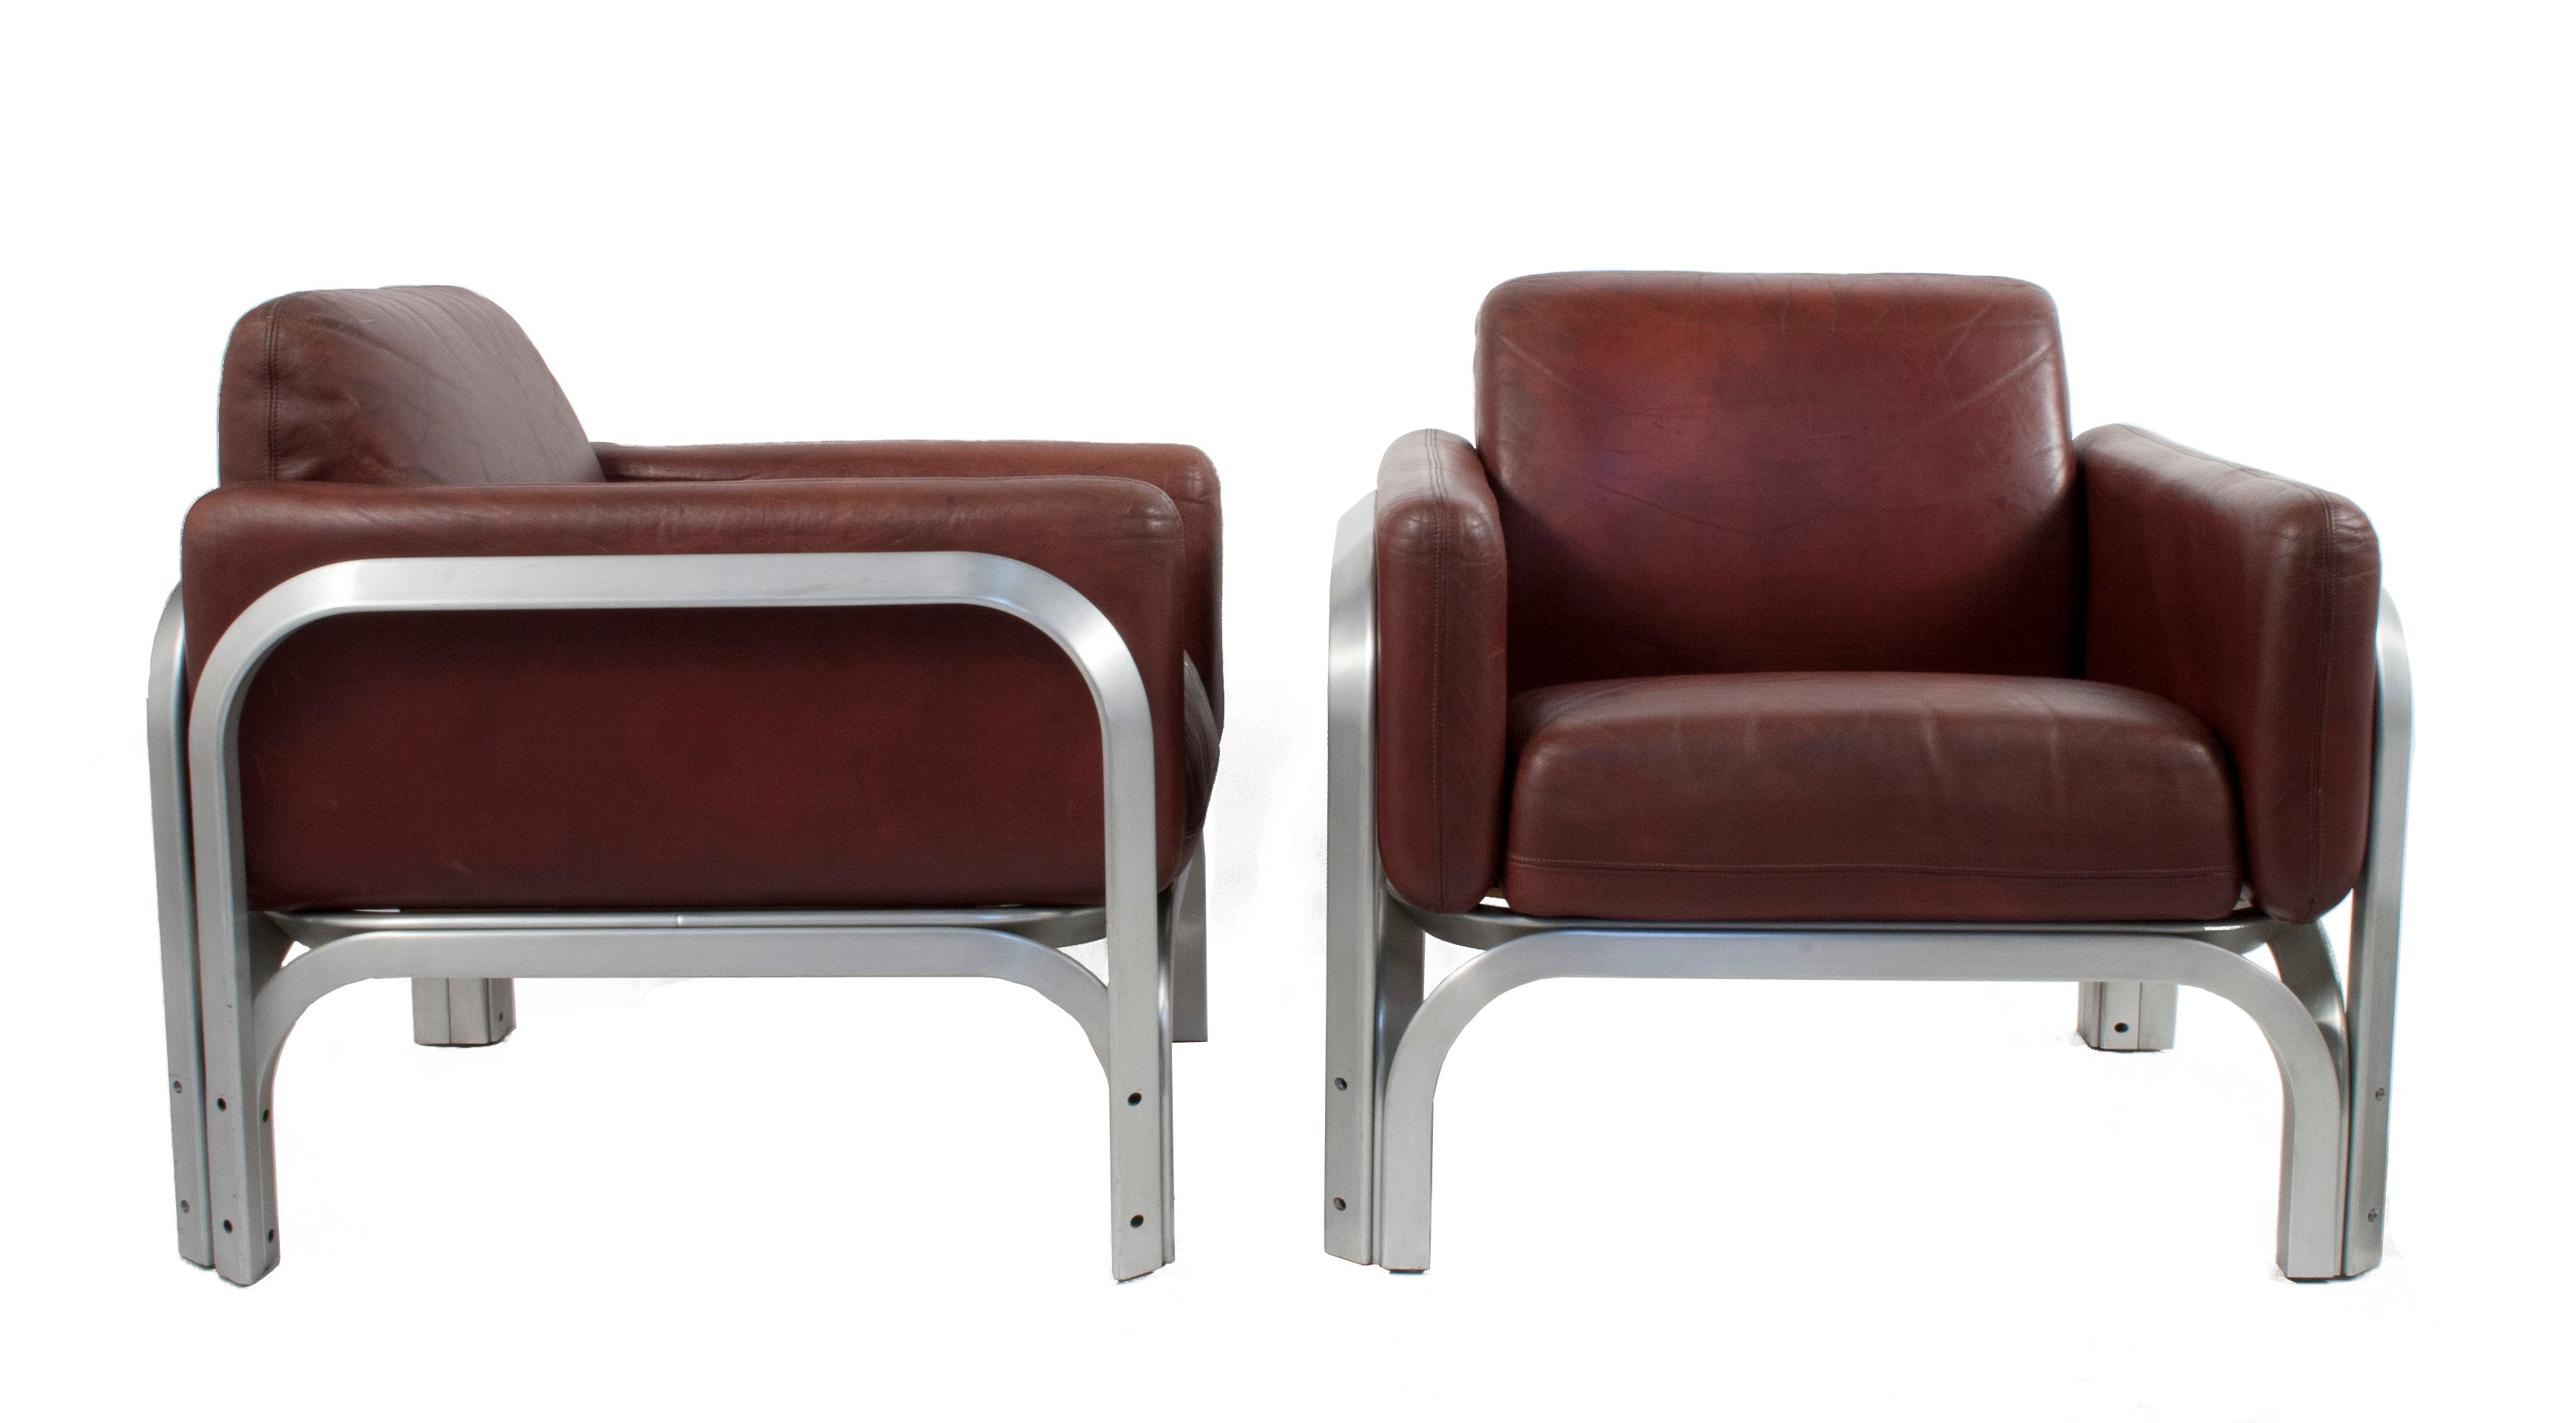 Pair of Leather Lounge Chairs by Jorn Utzen